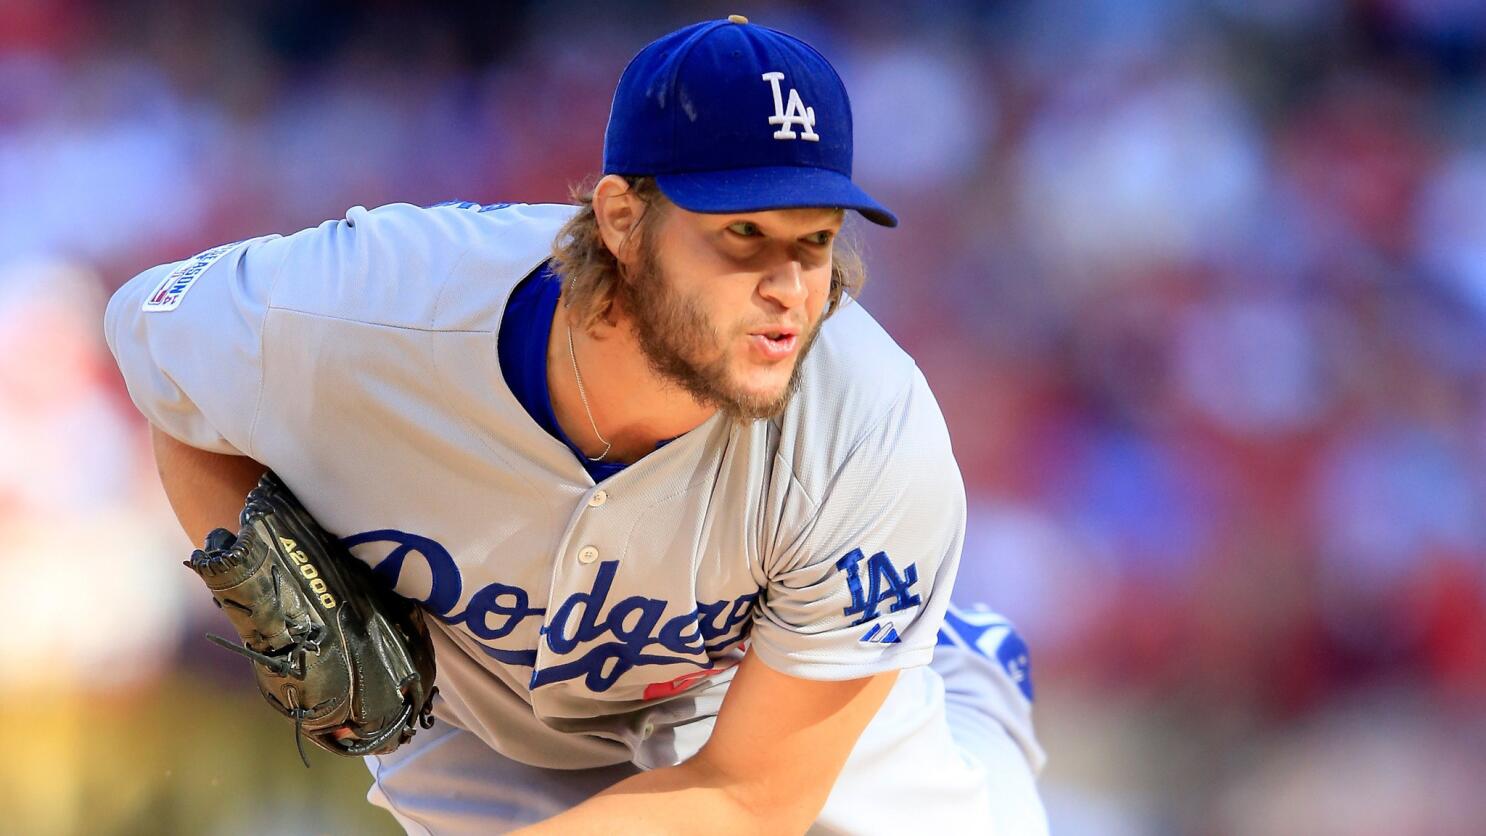 Clayton Kershaw named finalist for 2013 NL Cy Young Award - True Blue LA